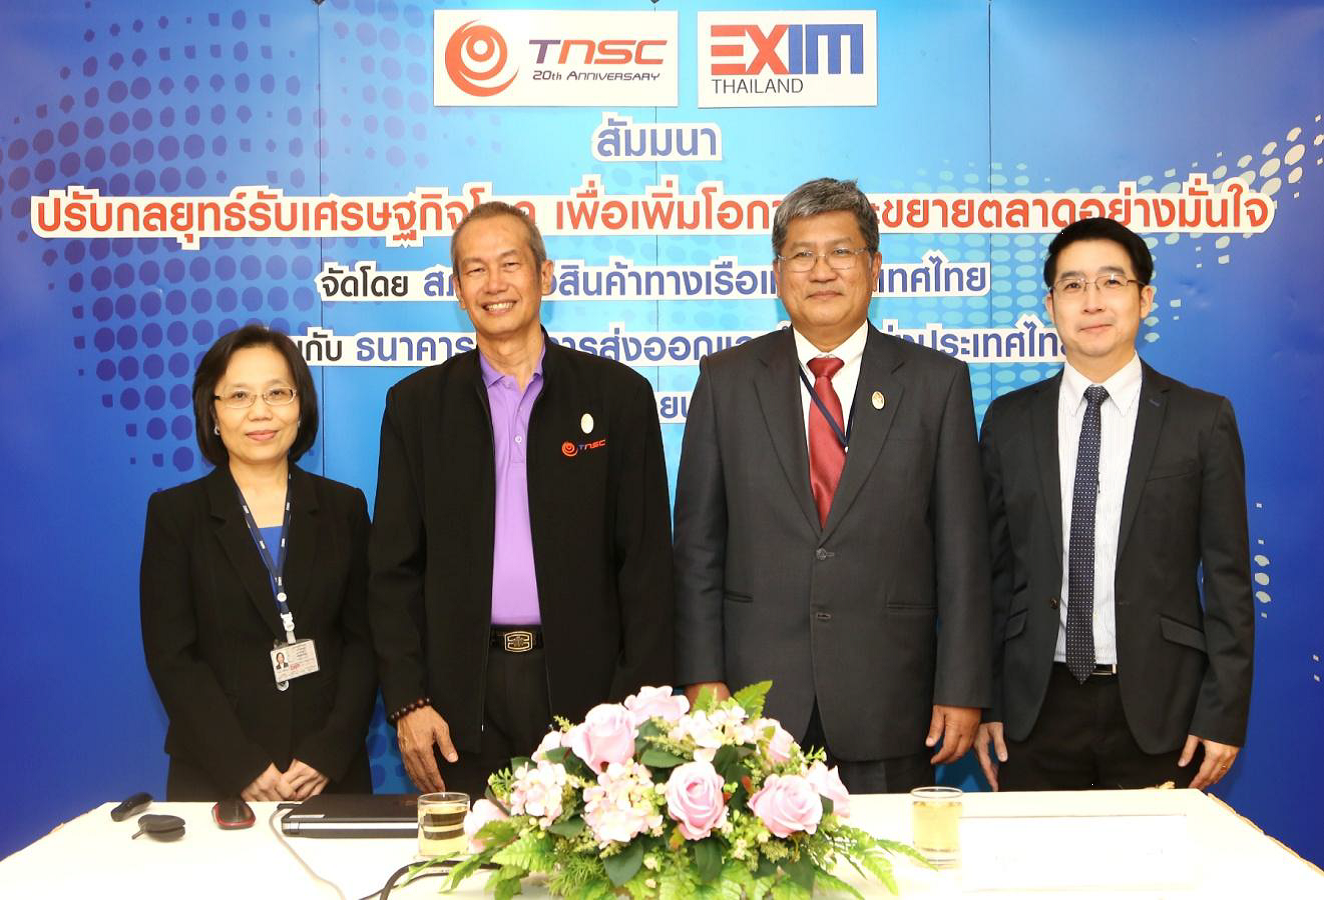 EXIM Thailand and TNSC Hold Seminar to Promote Thai Exporters’ Readiness to Cope with Global Economy